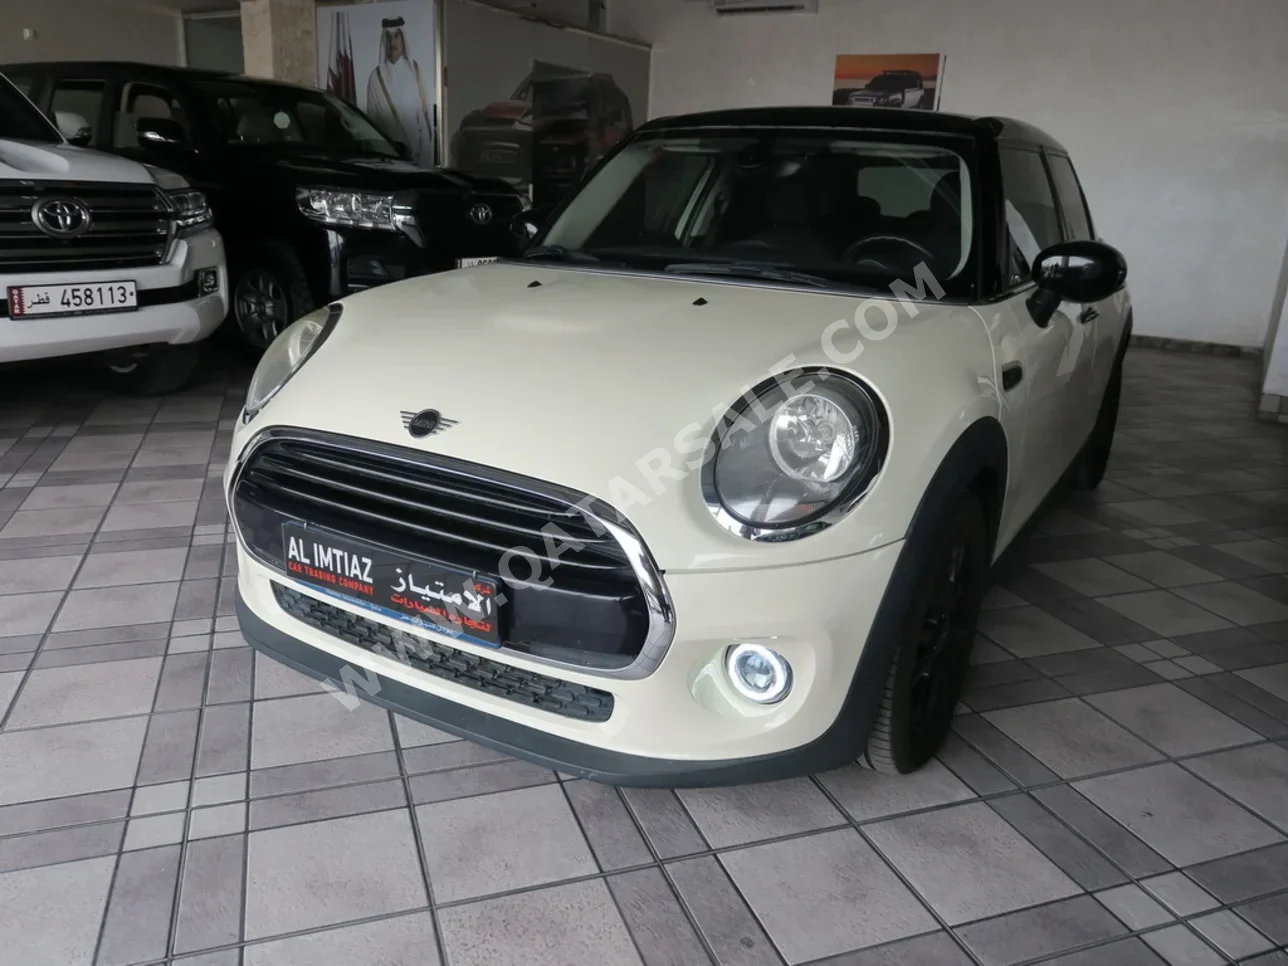 Mini  Cooper  2020  Automatic  67,000 Km  4 Cylinder  Front Wheel Drive (FWD)  Hatchback  White